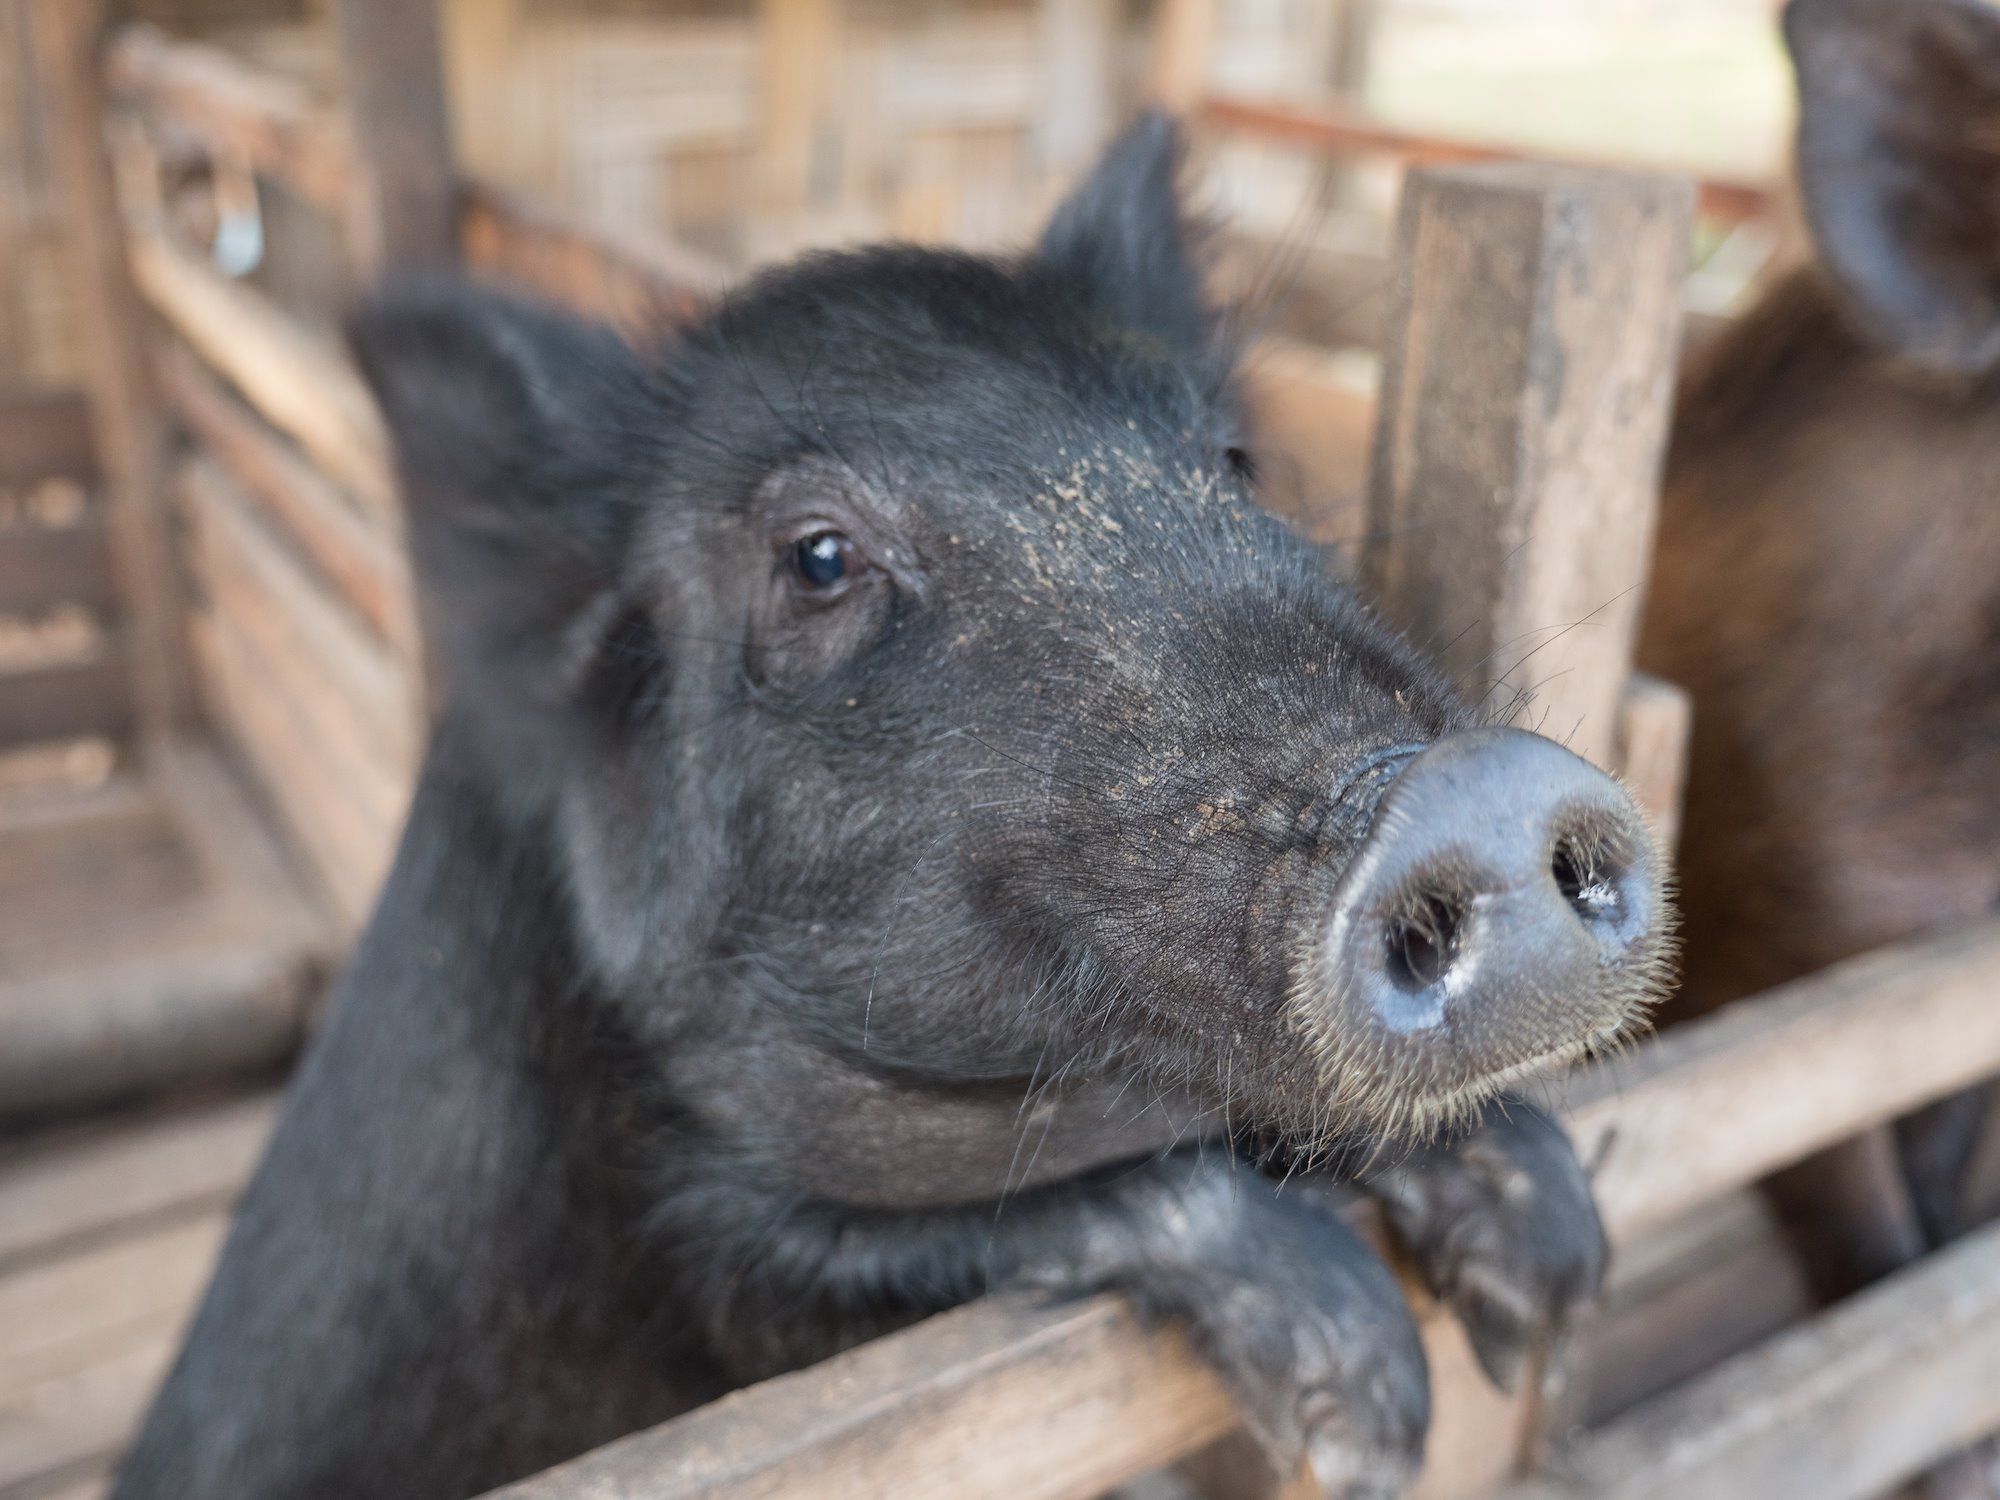 A black pig standing up against a pen fence